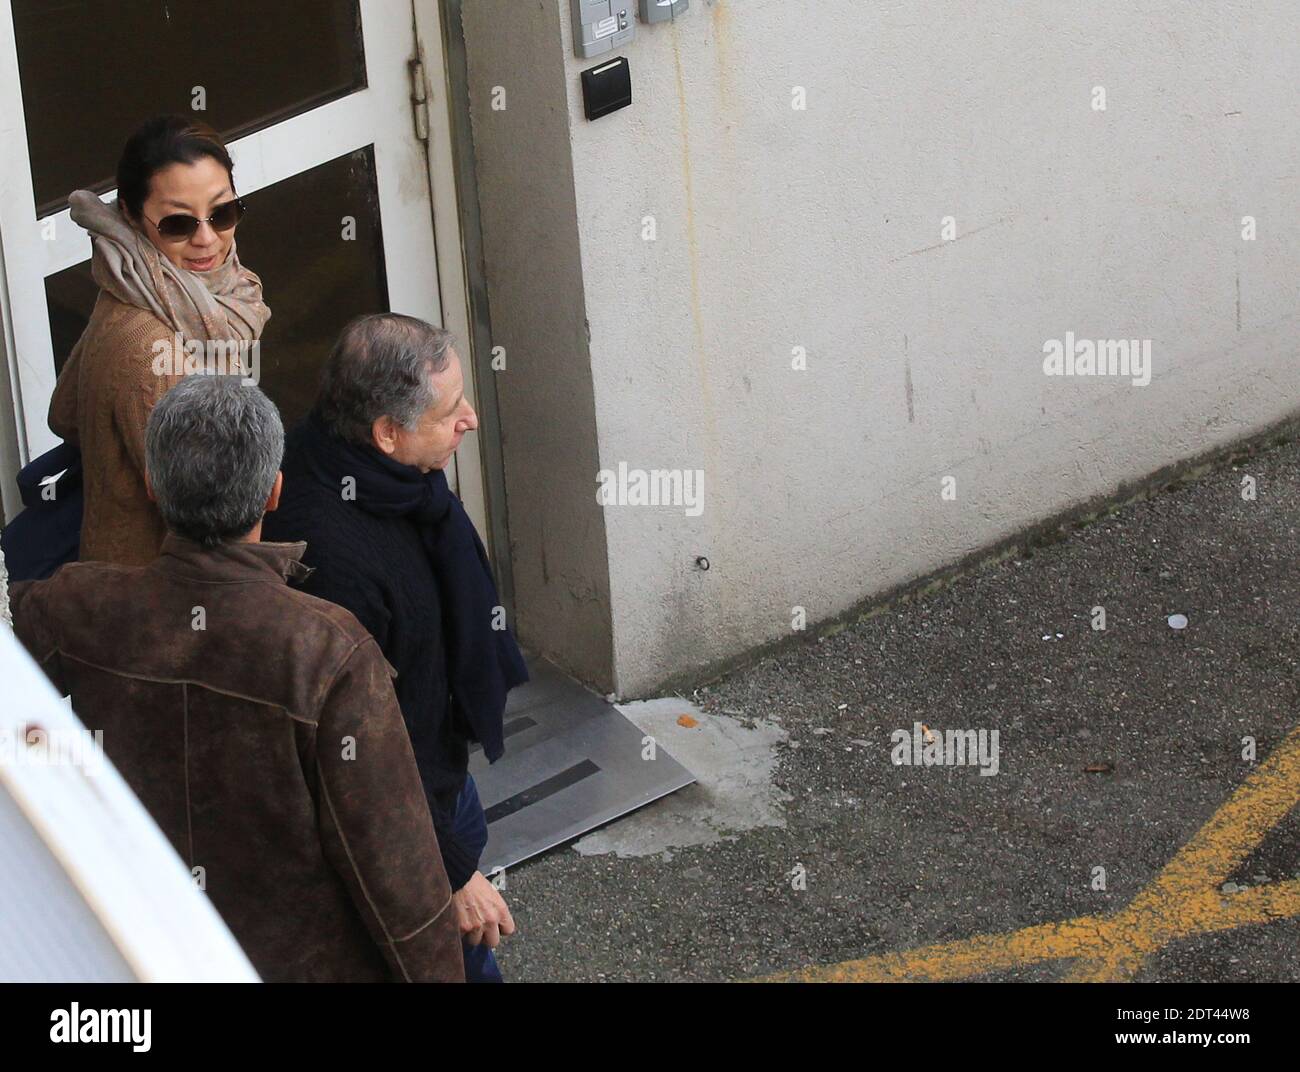 President of the Federation Internationale de l'Automobile (FIA) Jean Todt  and his wife, actress Michelle Yeoh, leave the 'Centre Hospitalier  Universitaire' (CHU) hospital in Grenoble, near the French Alps, France,  January 1,